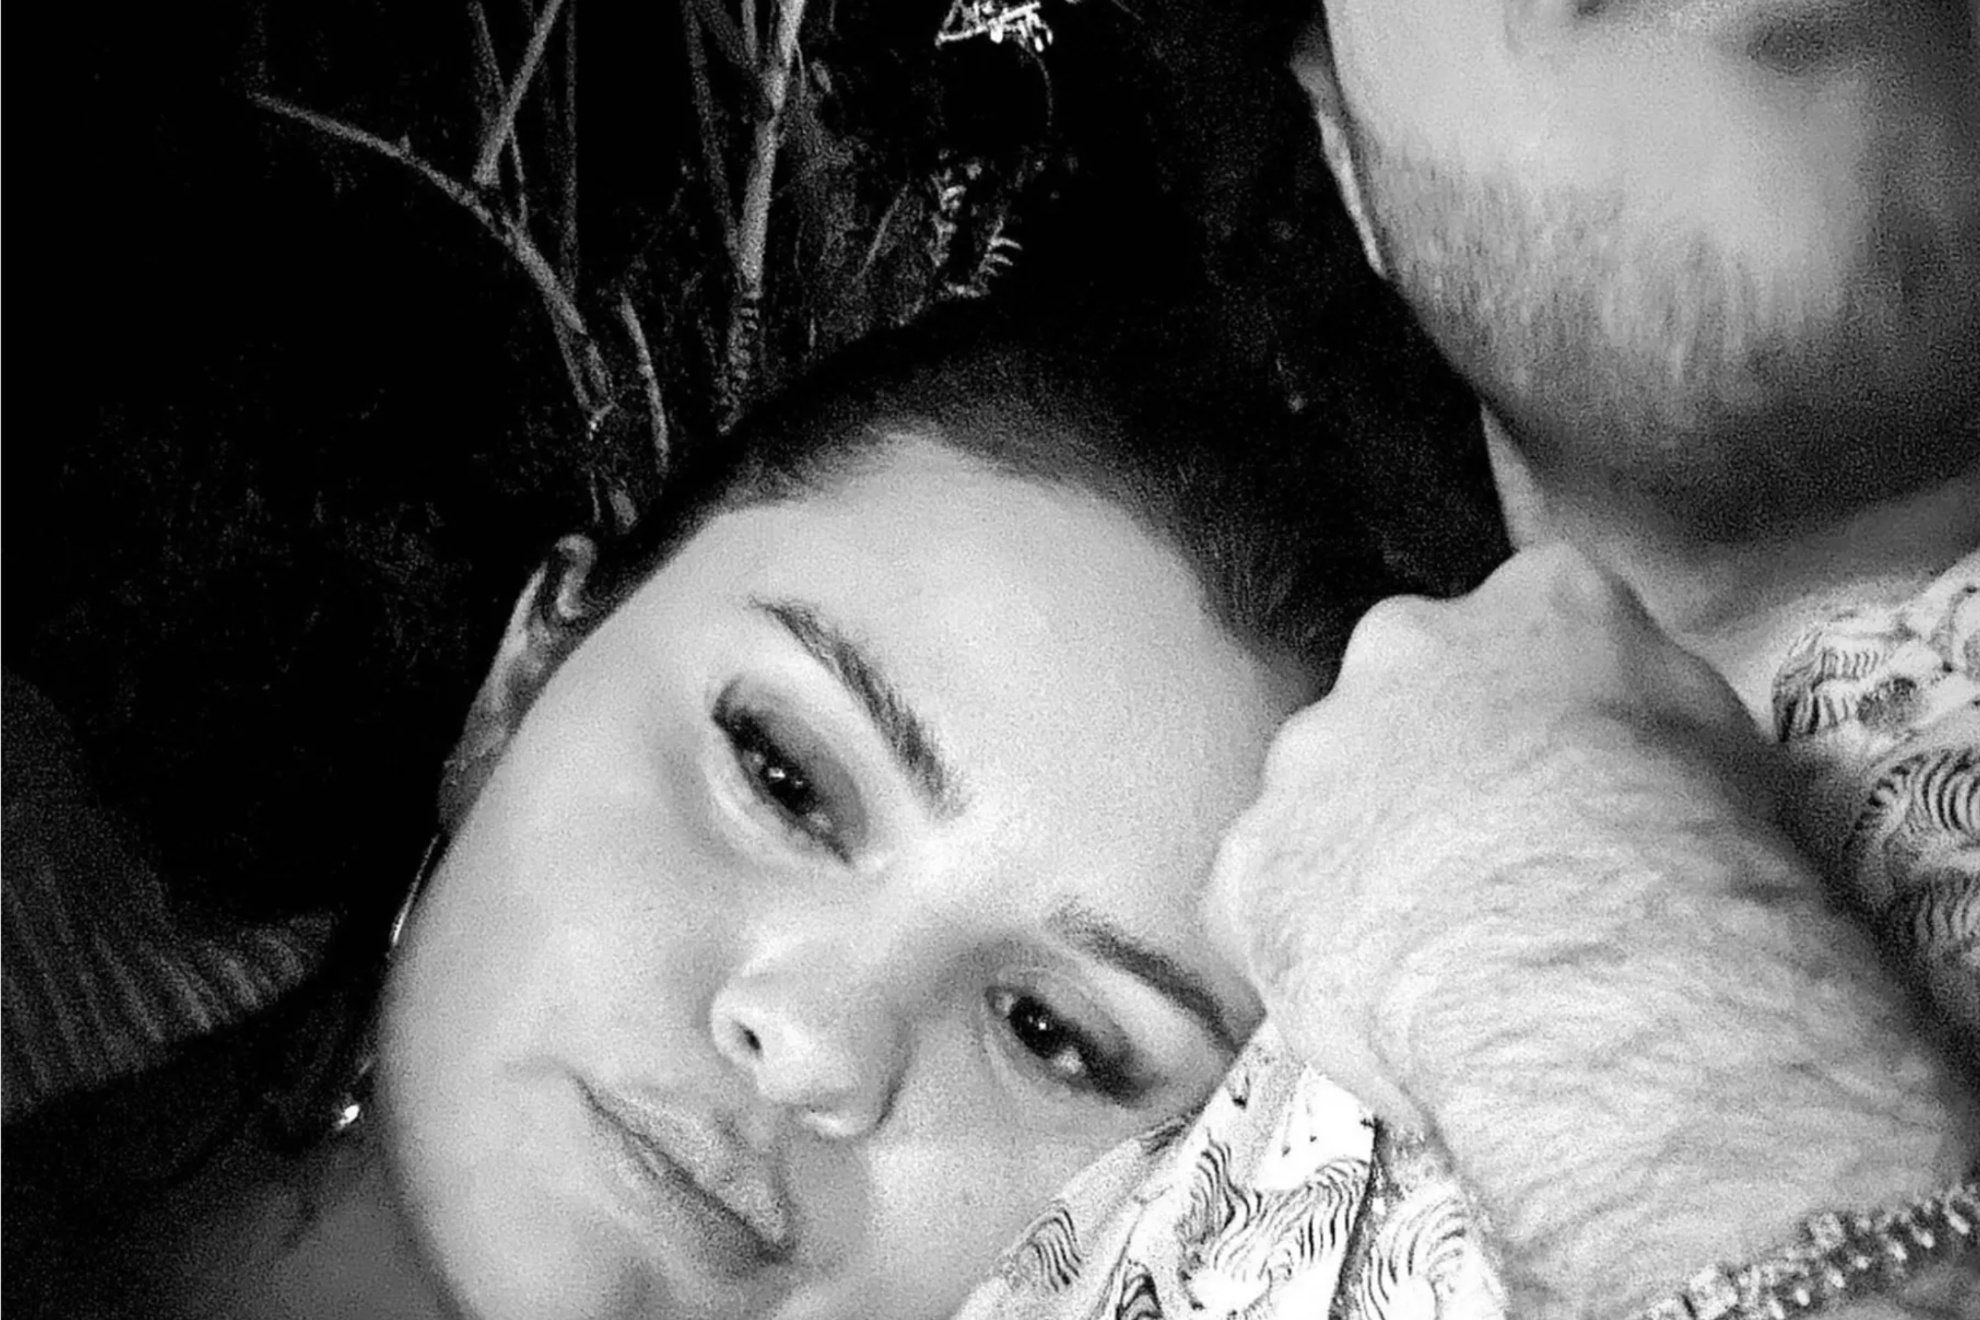 Selena Gomez challenged her fans with this photo of her new love.